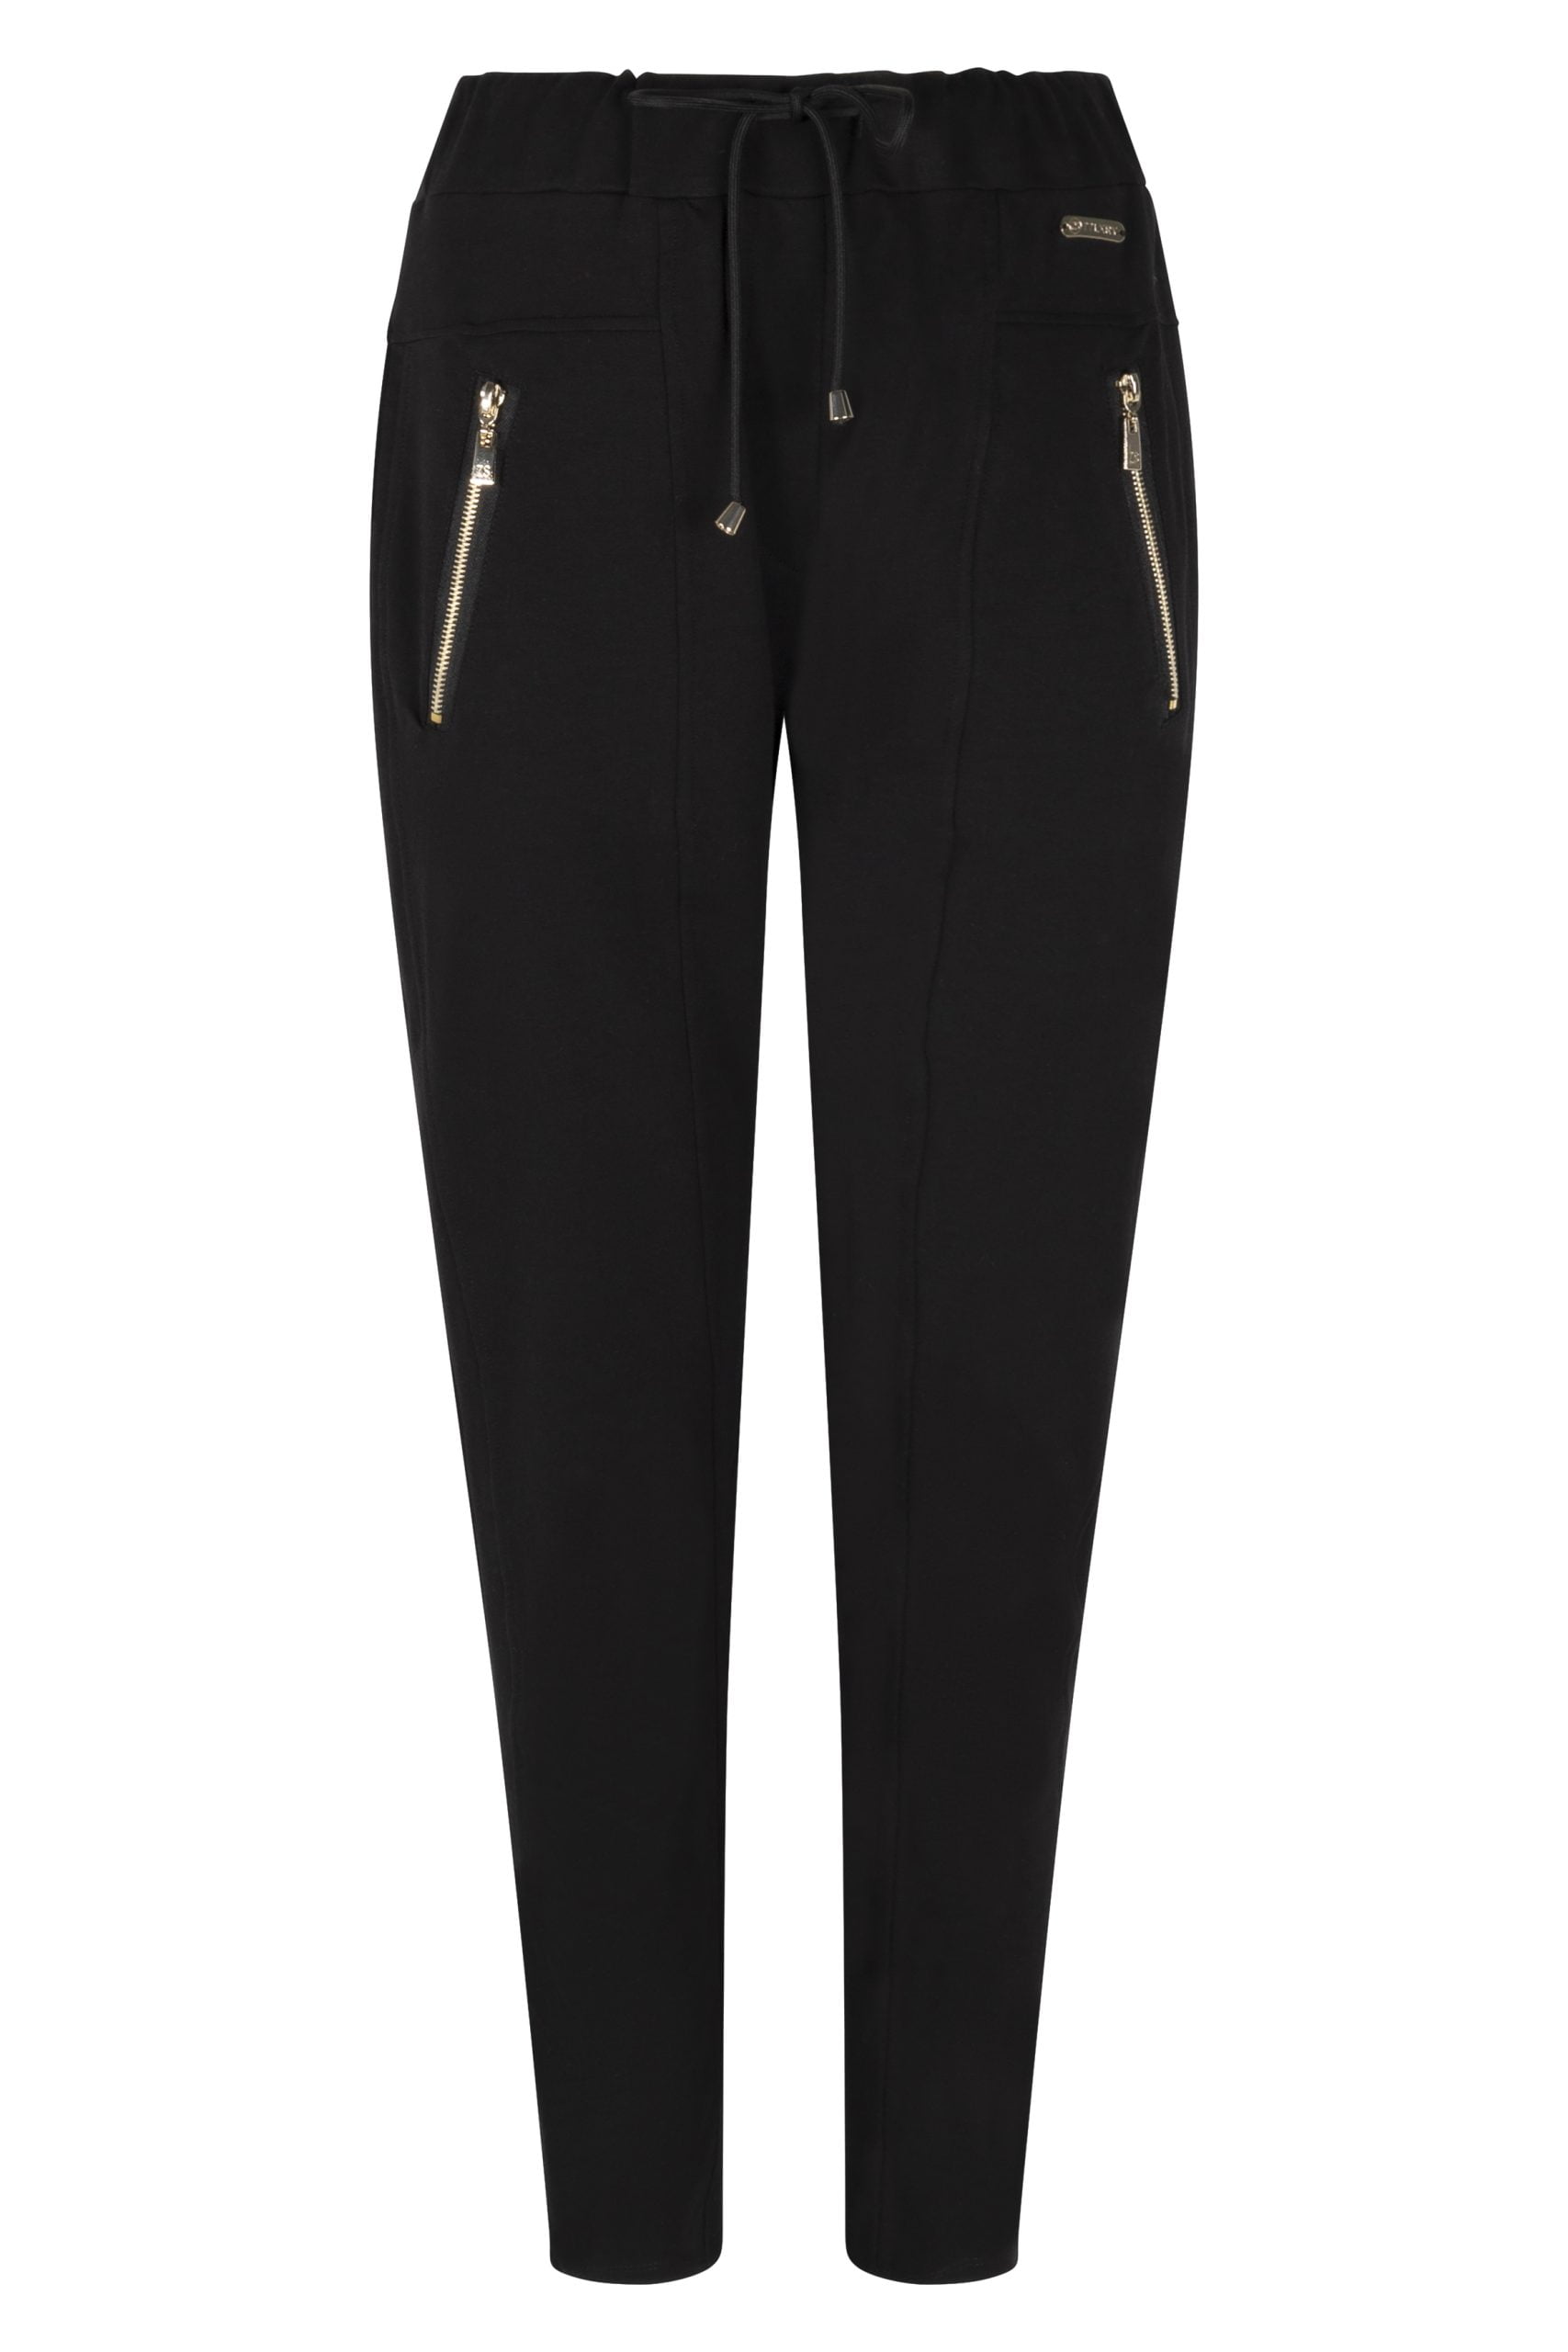 ZOSO 225 Coos Luxury Pant With Gold Zipper Black